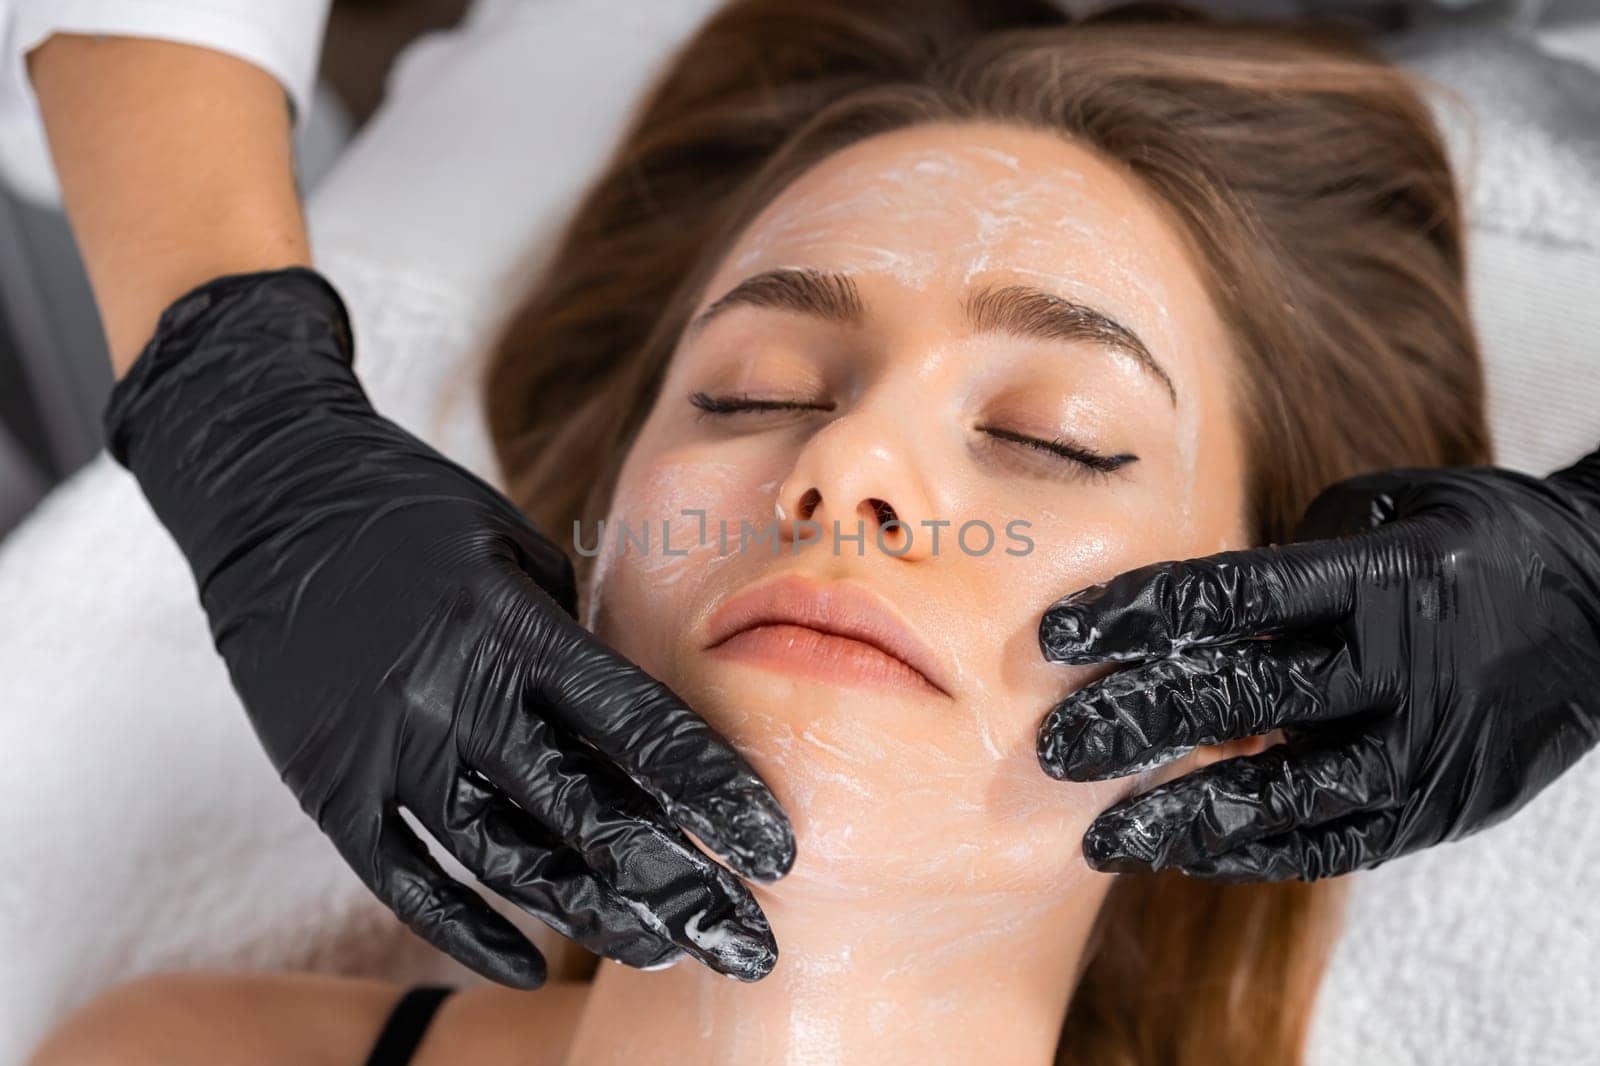 Young blonde woman getting face massage treatment at cosmetology clinic. Skin and body care concept.